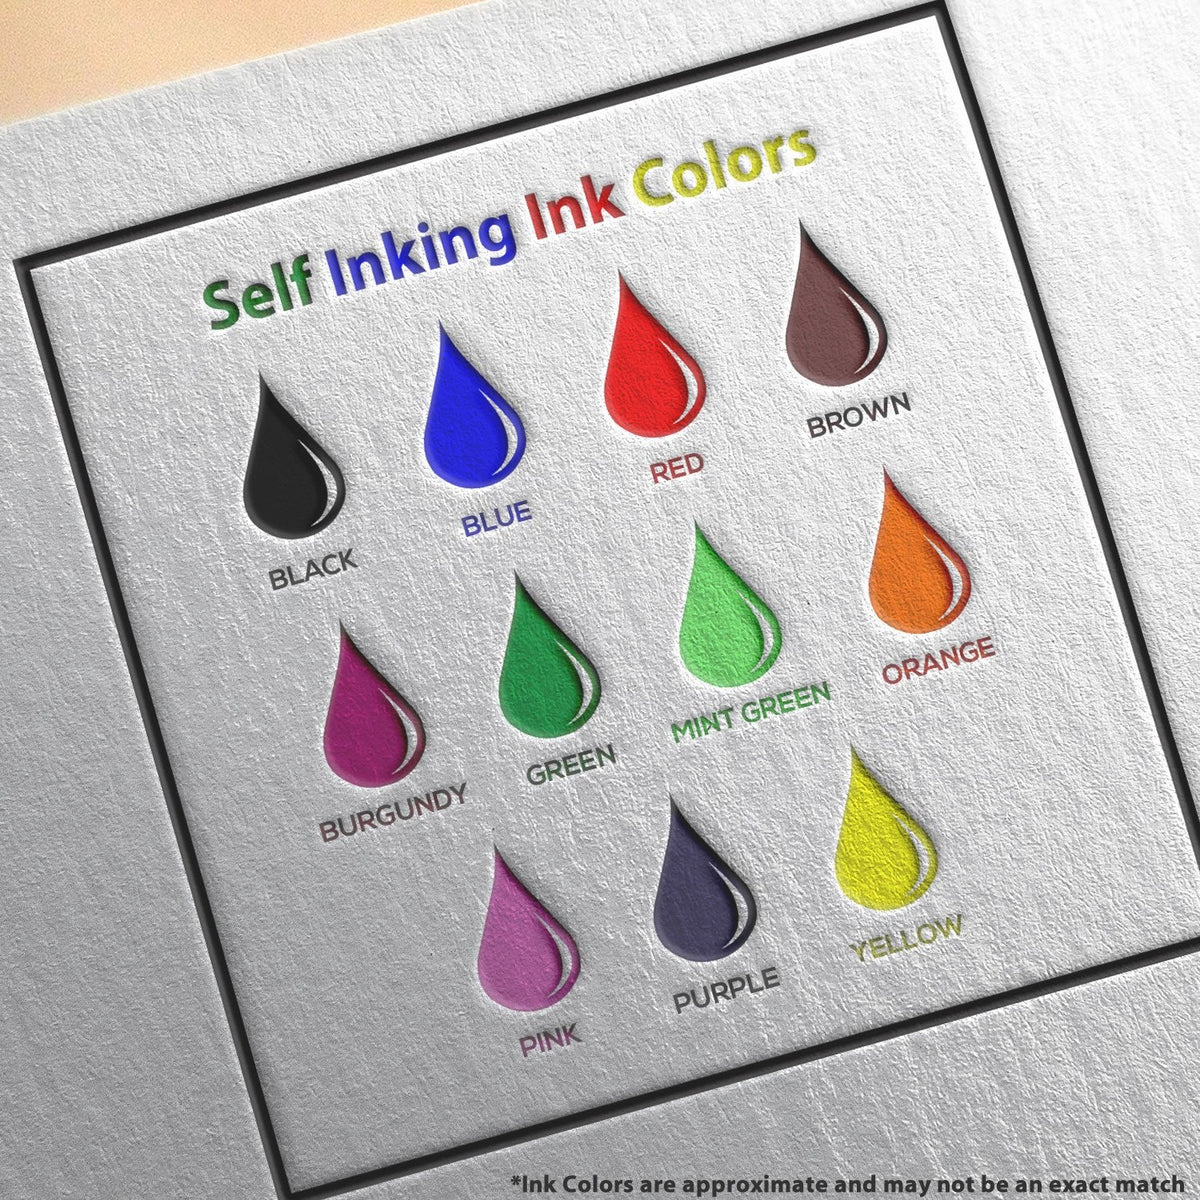 Self-Inking Physical Due Stamp Ink Color Options